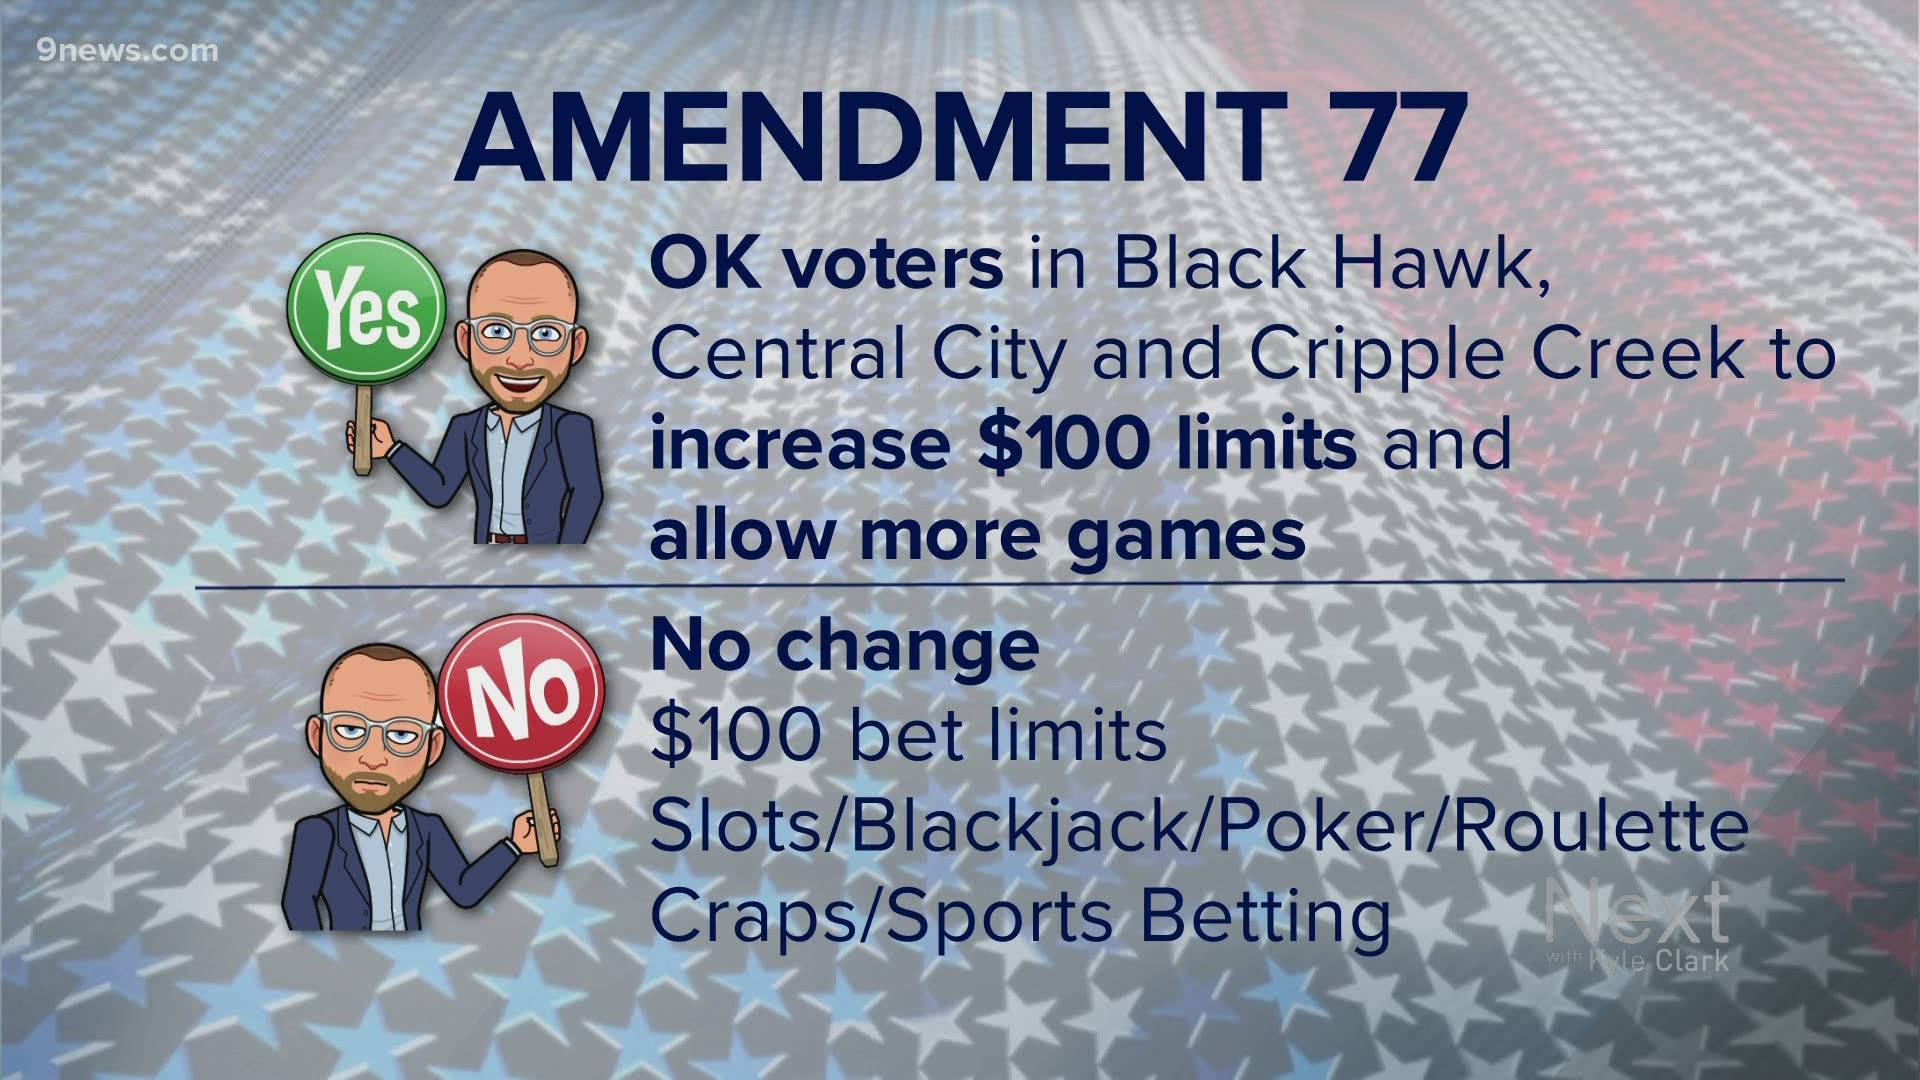 This is part of a series of statewide ballot reviews called "We Don't Have To Agree, But Let's Just Vote." Today we look at two Amendments: 77 & C.